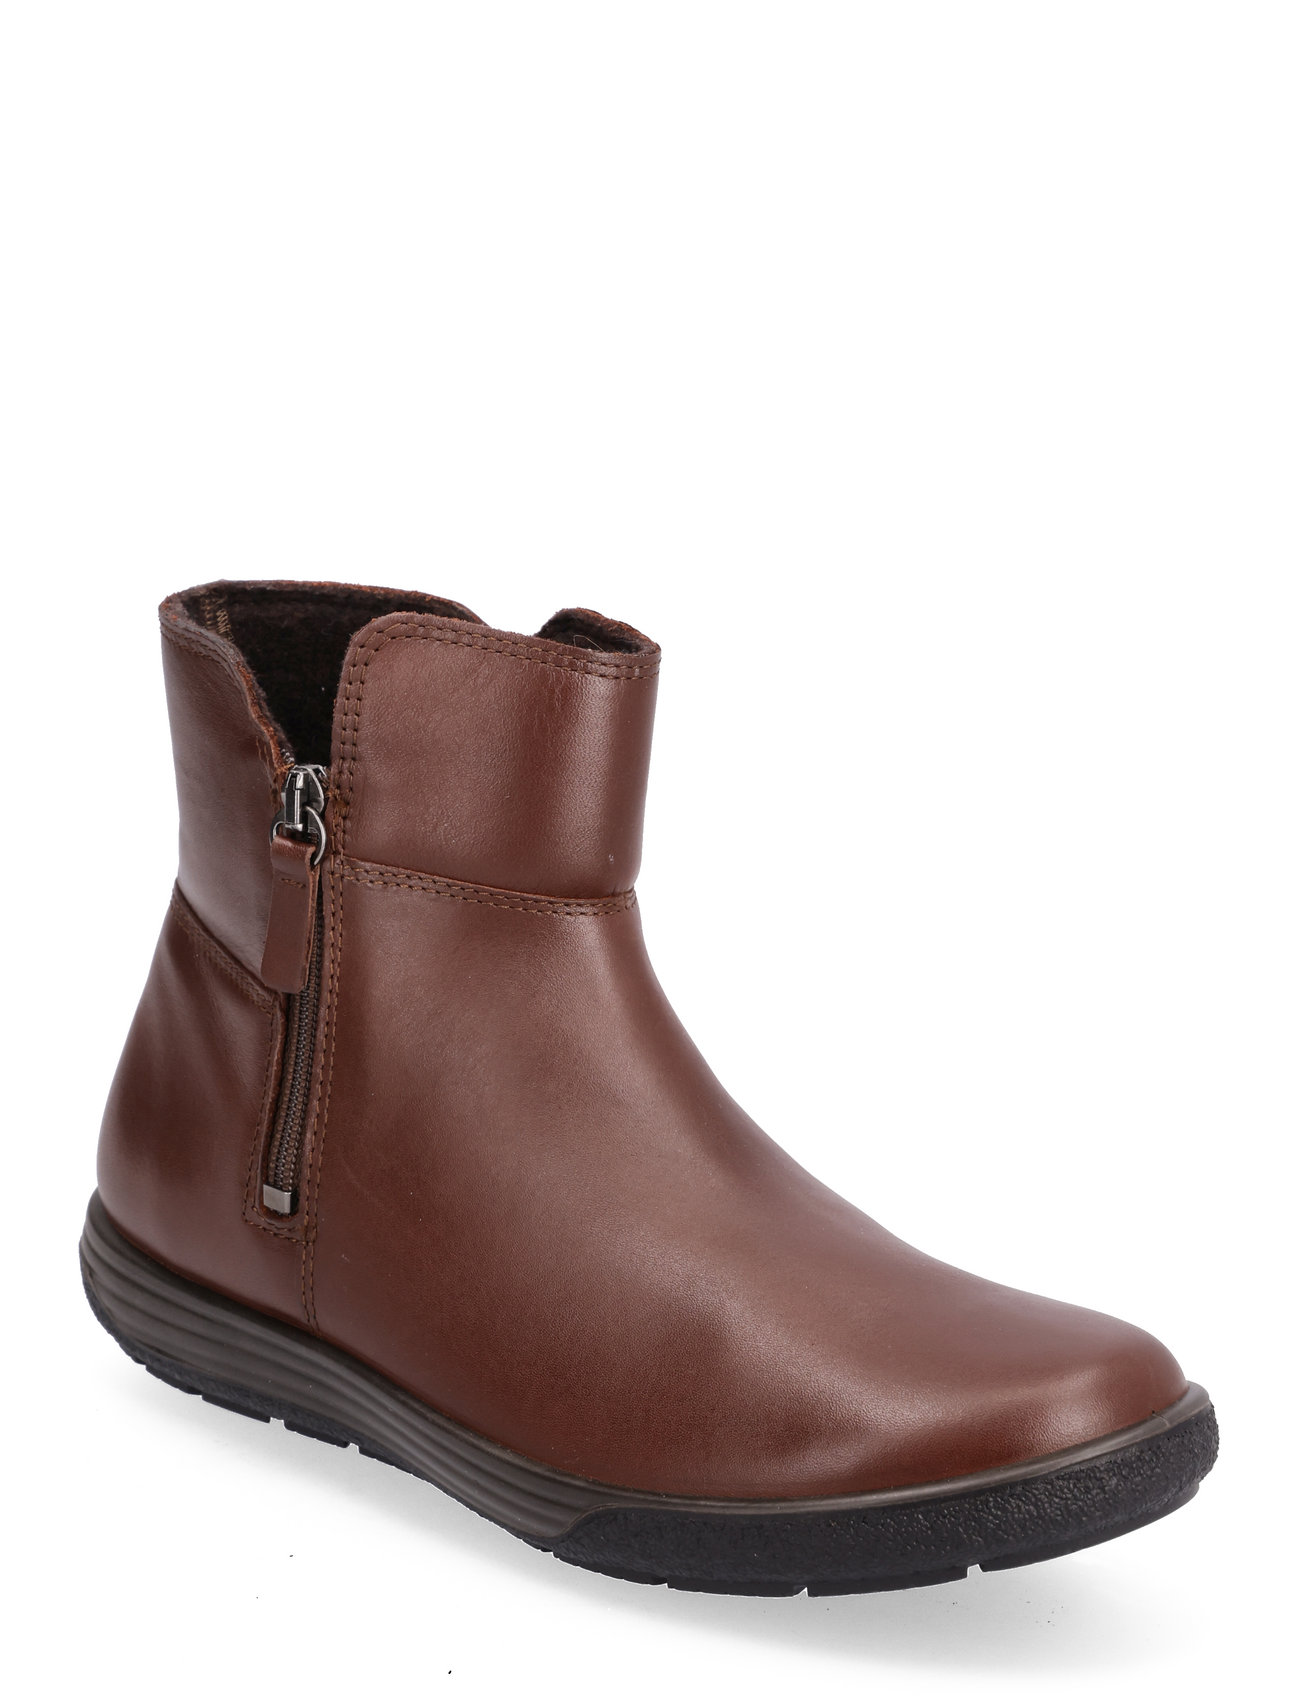 Volg ons Intact George Stevenson ECCO Chase Ii - Flat ankle boots - Boozt.com